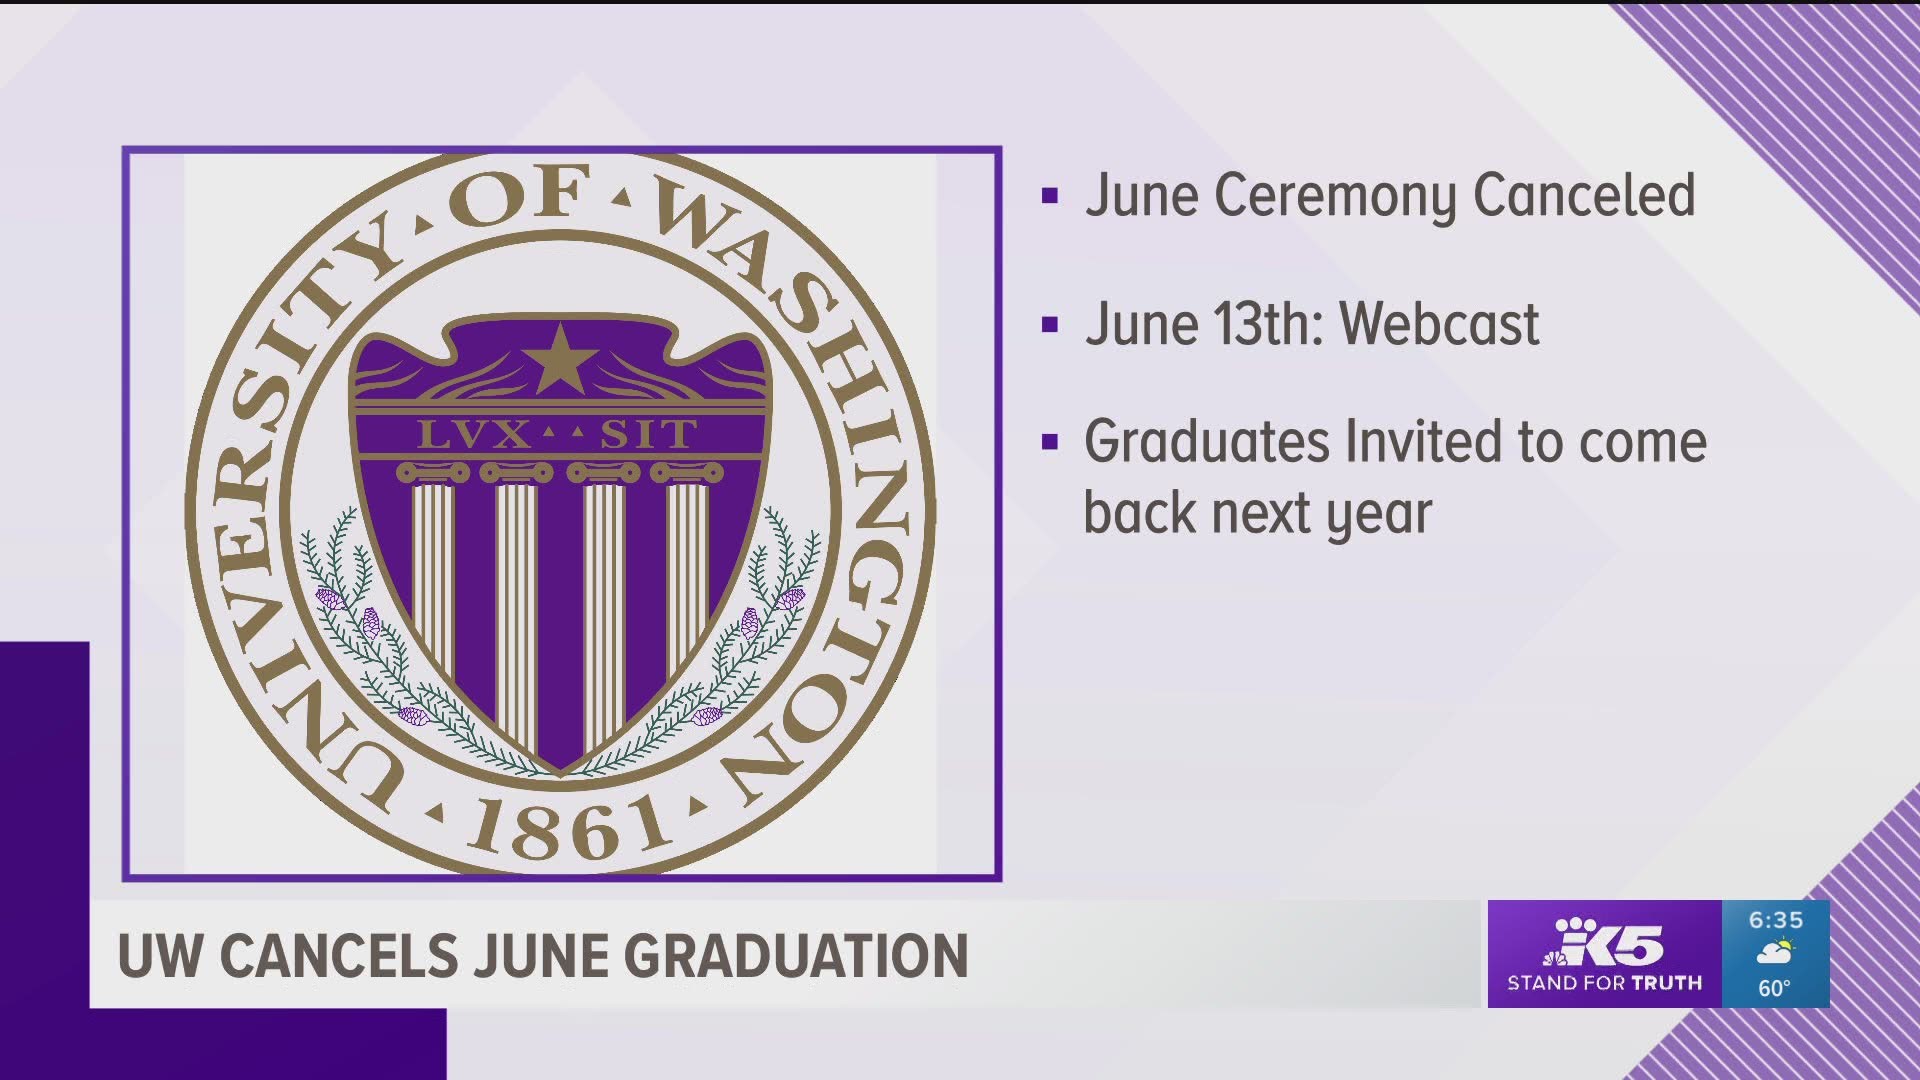 Seattle University and the University of Washington will not have in-person graduation ceremonies this spring due to the coronavirus pandemic.